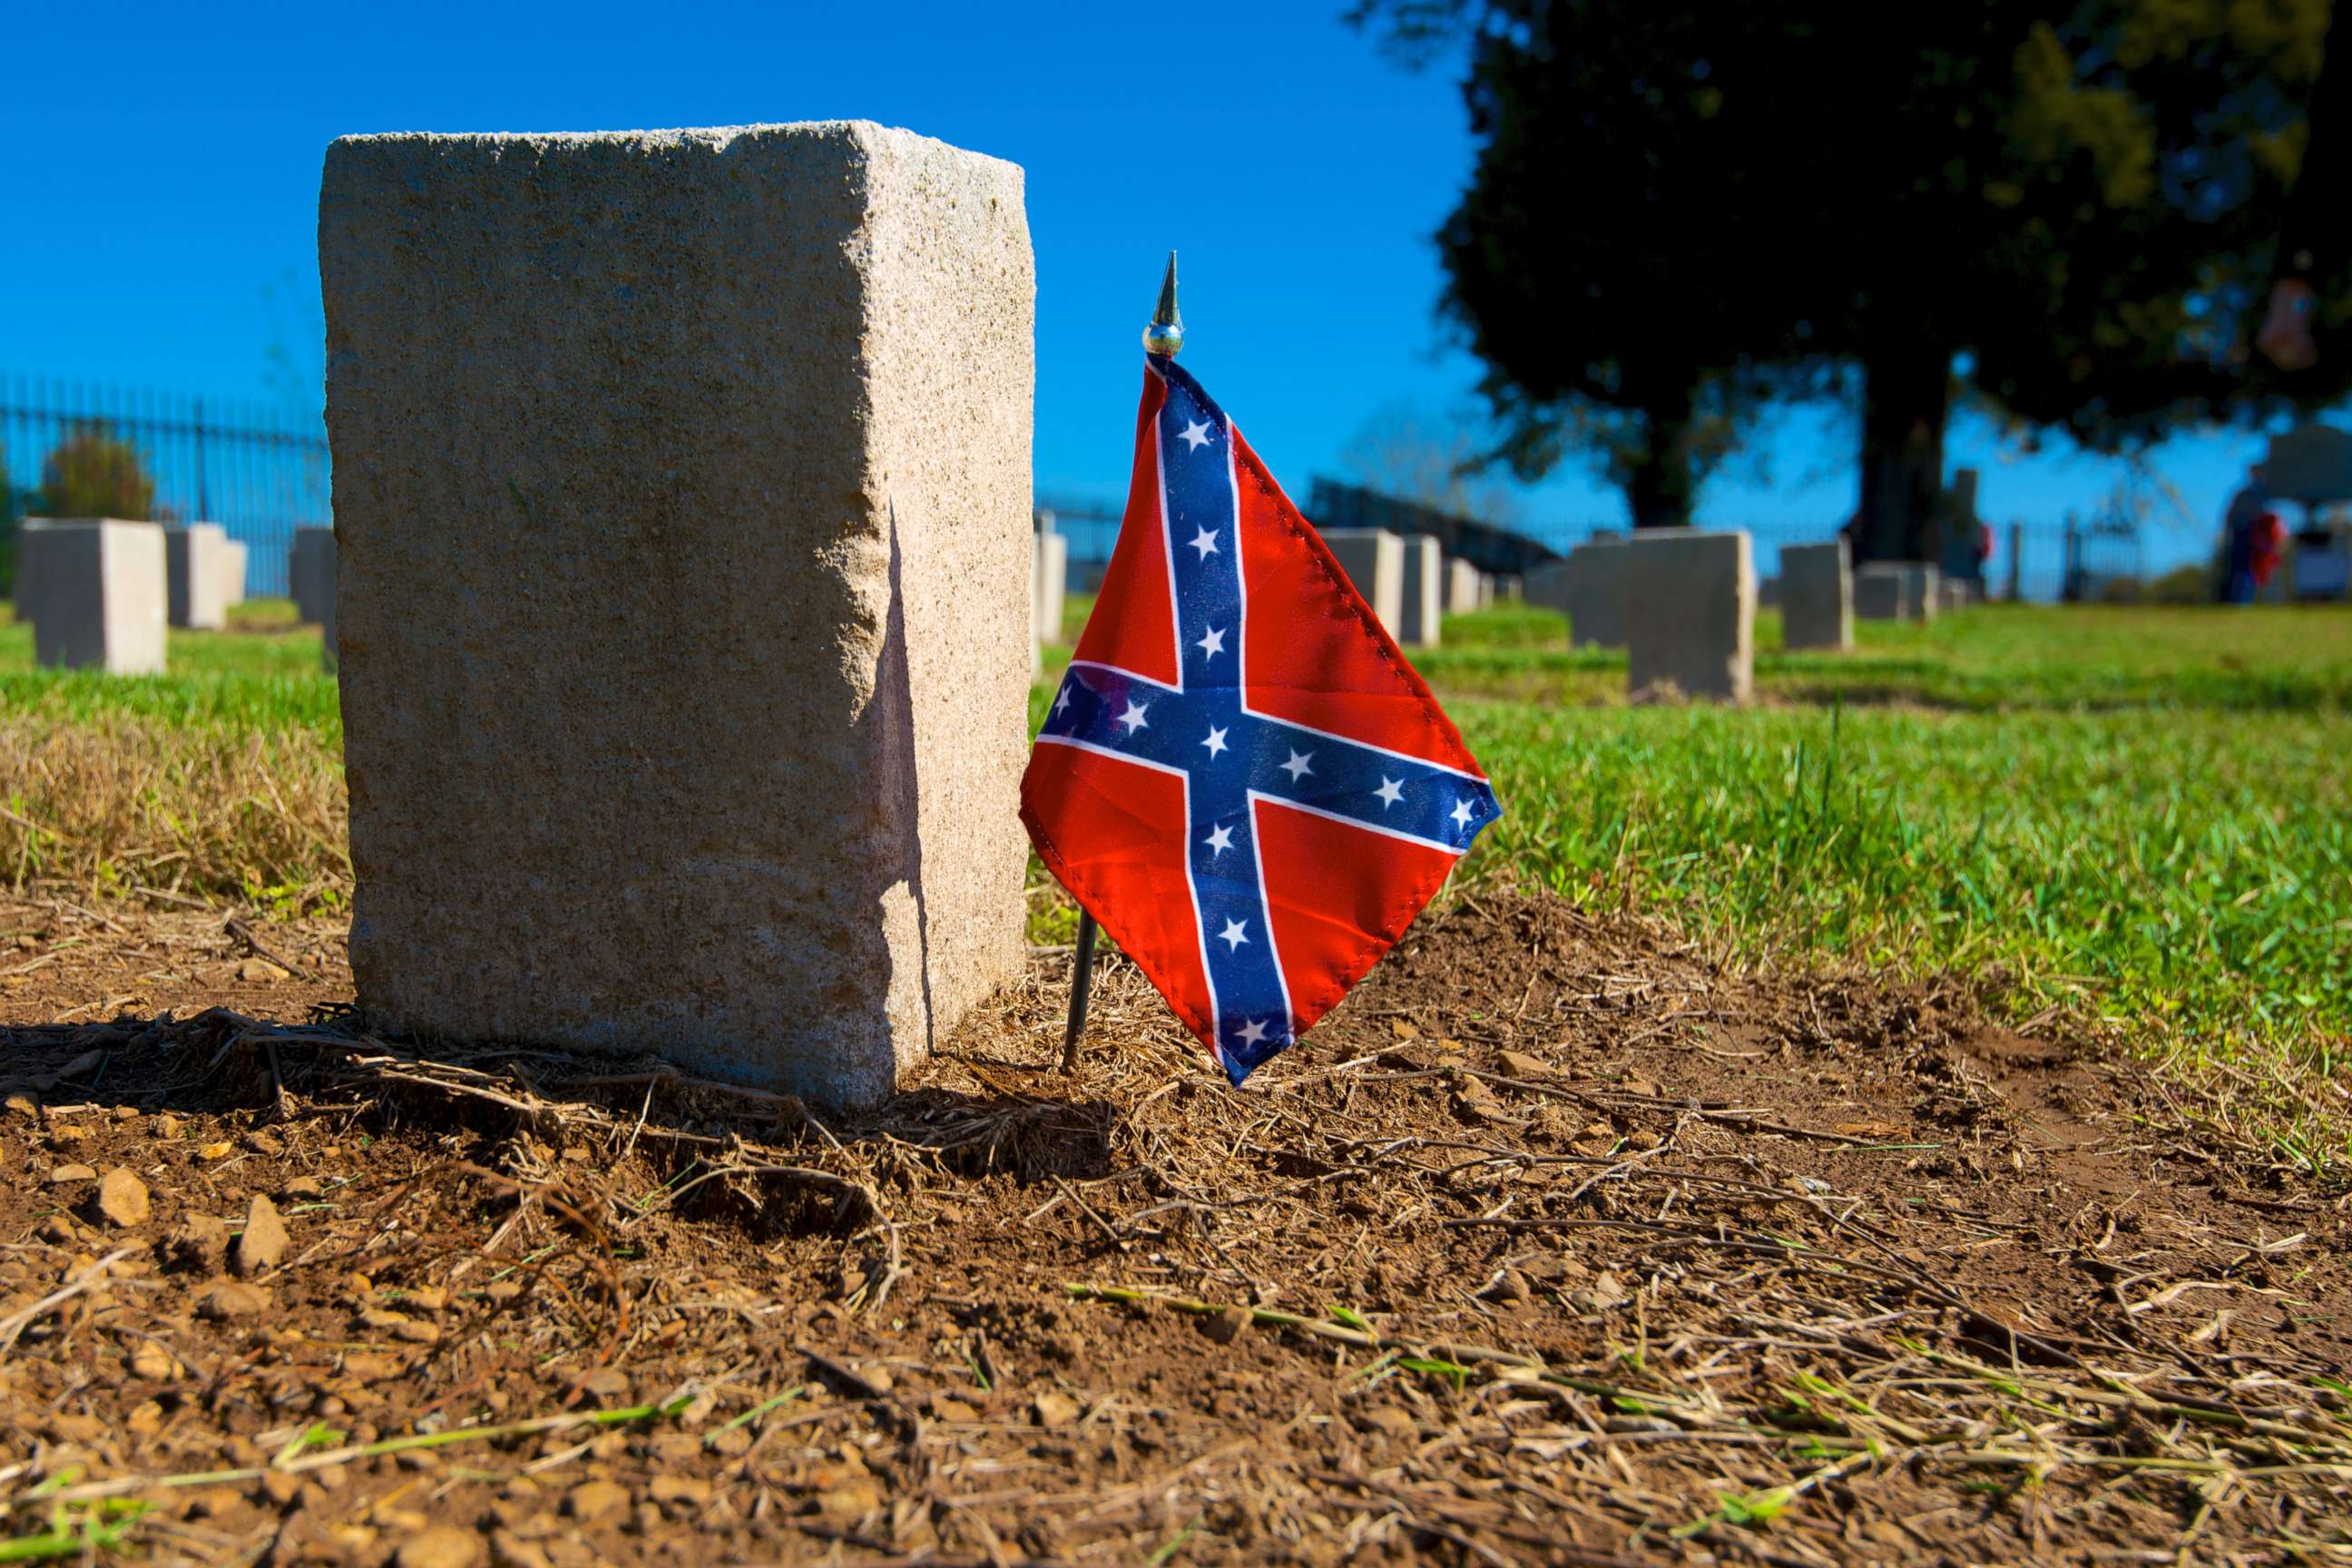 PHOTO: A confederate flag is put next to a gravestone in a cemetery, in this undated file photo.